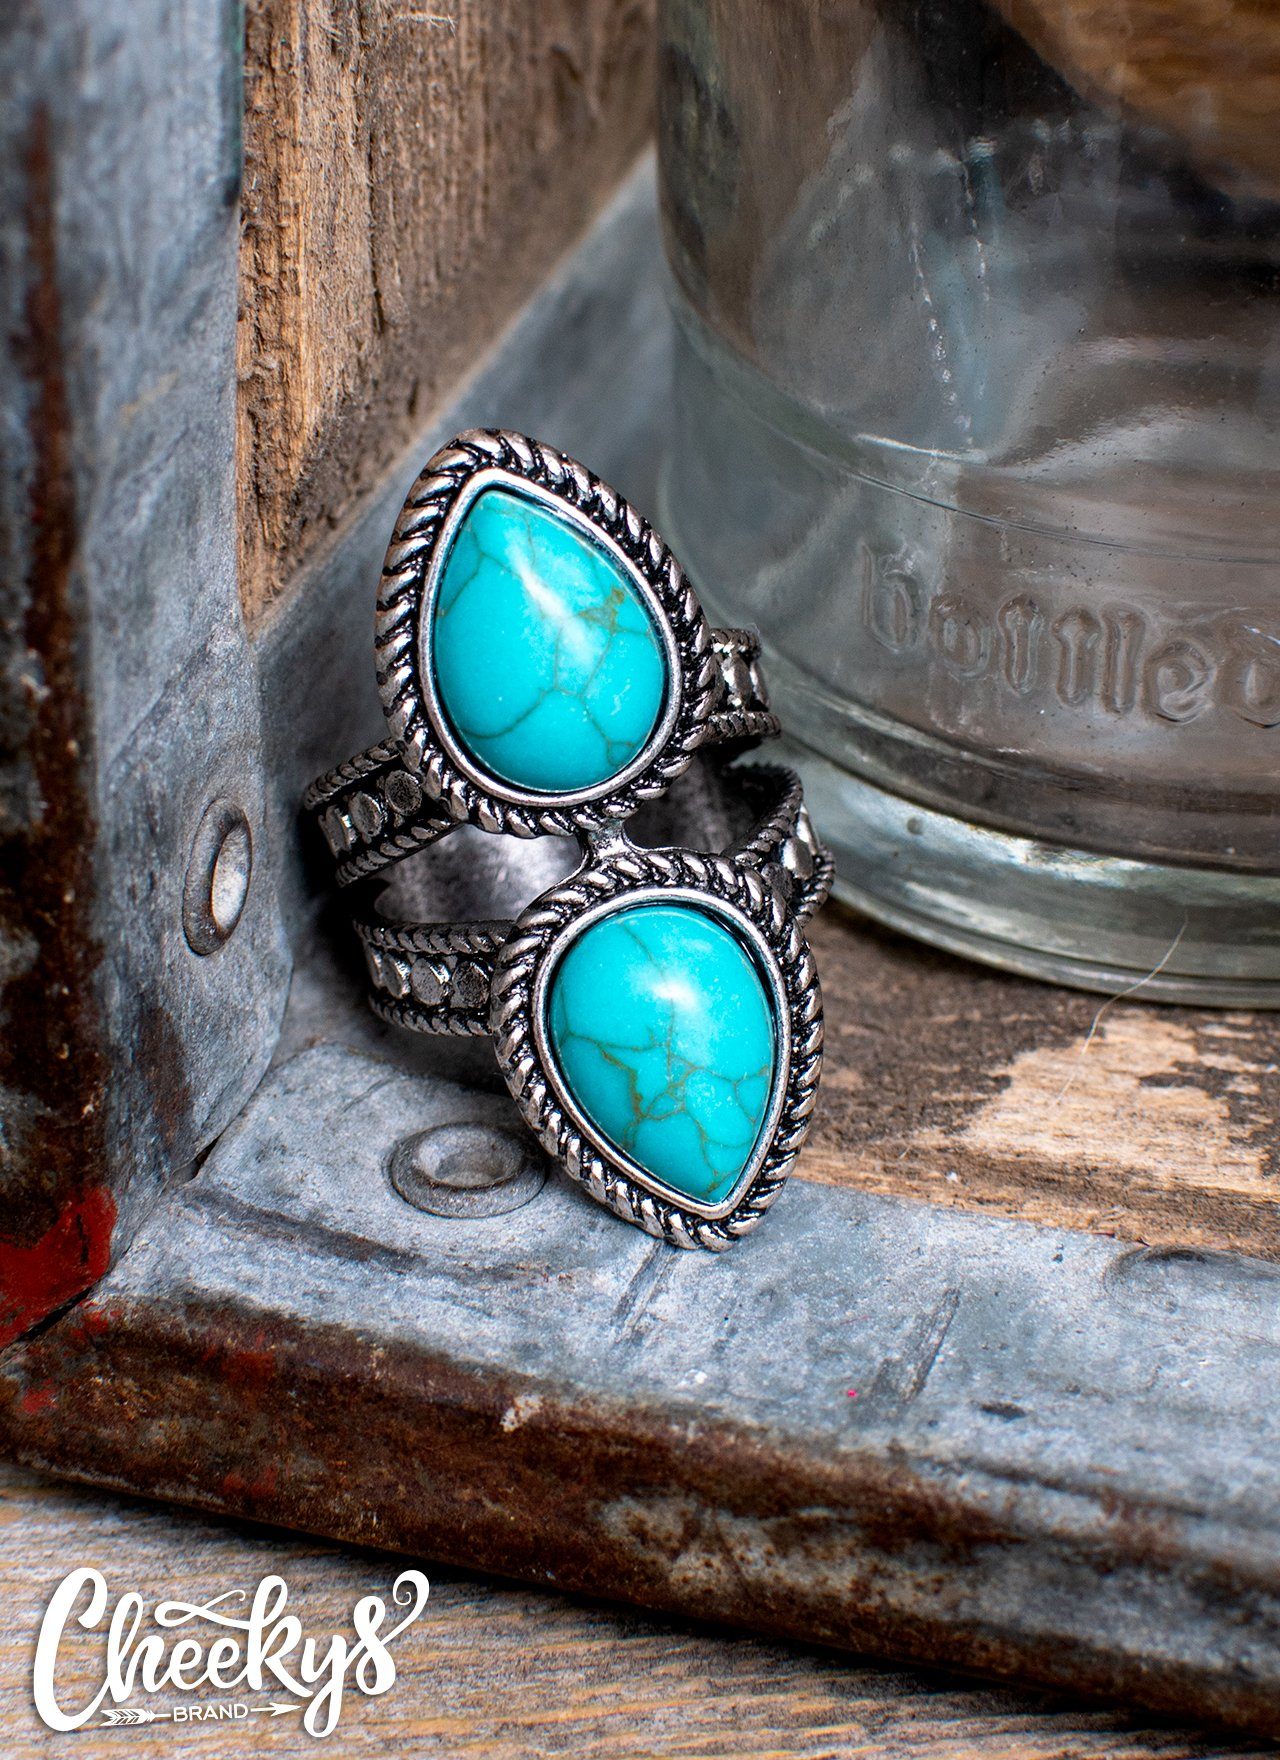 Callie Mirrored Teardrop Stone Ring in Turquoise Jewelry 18 